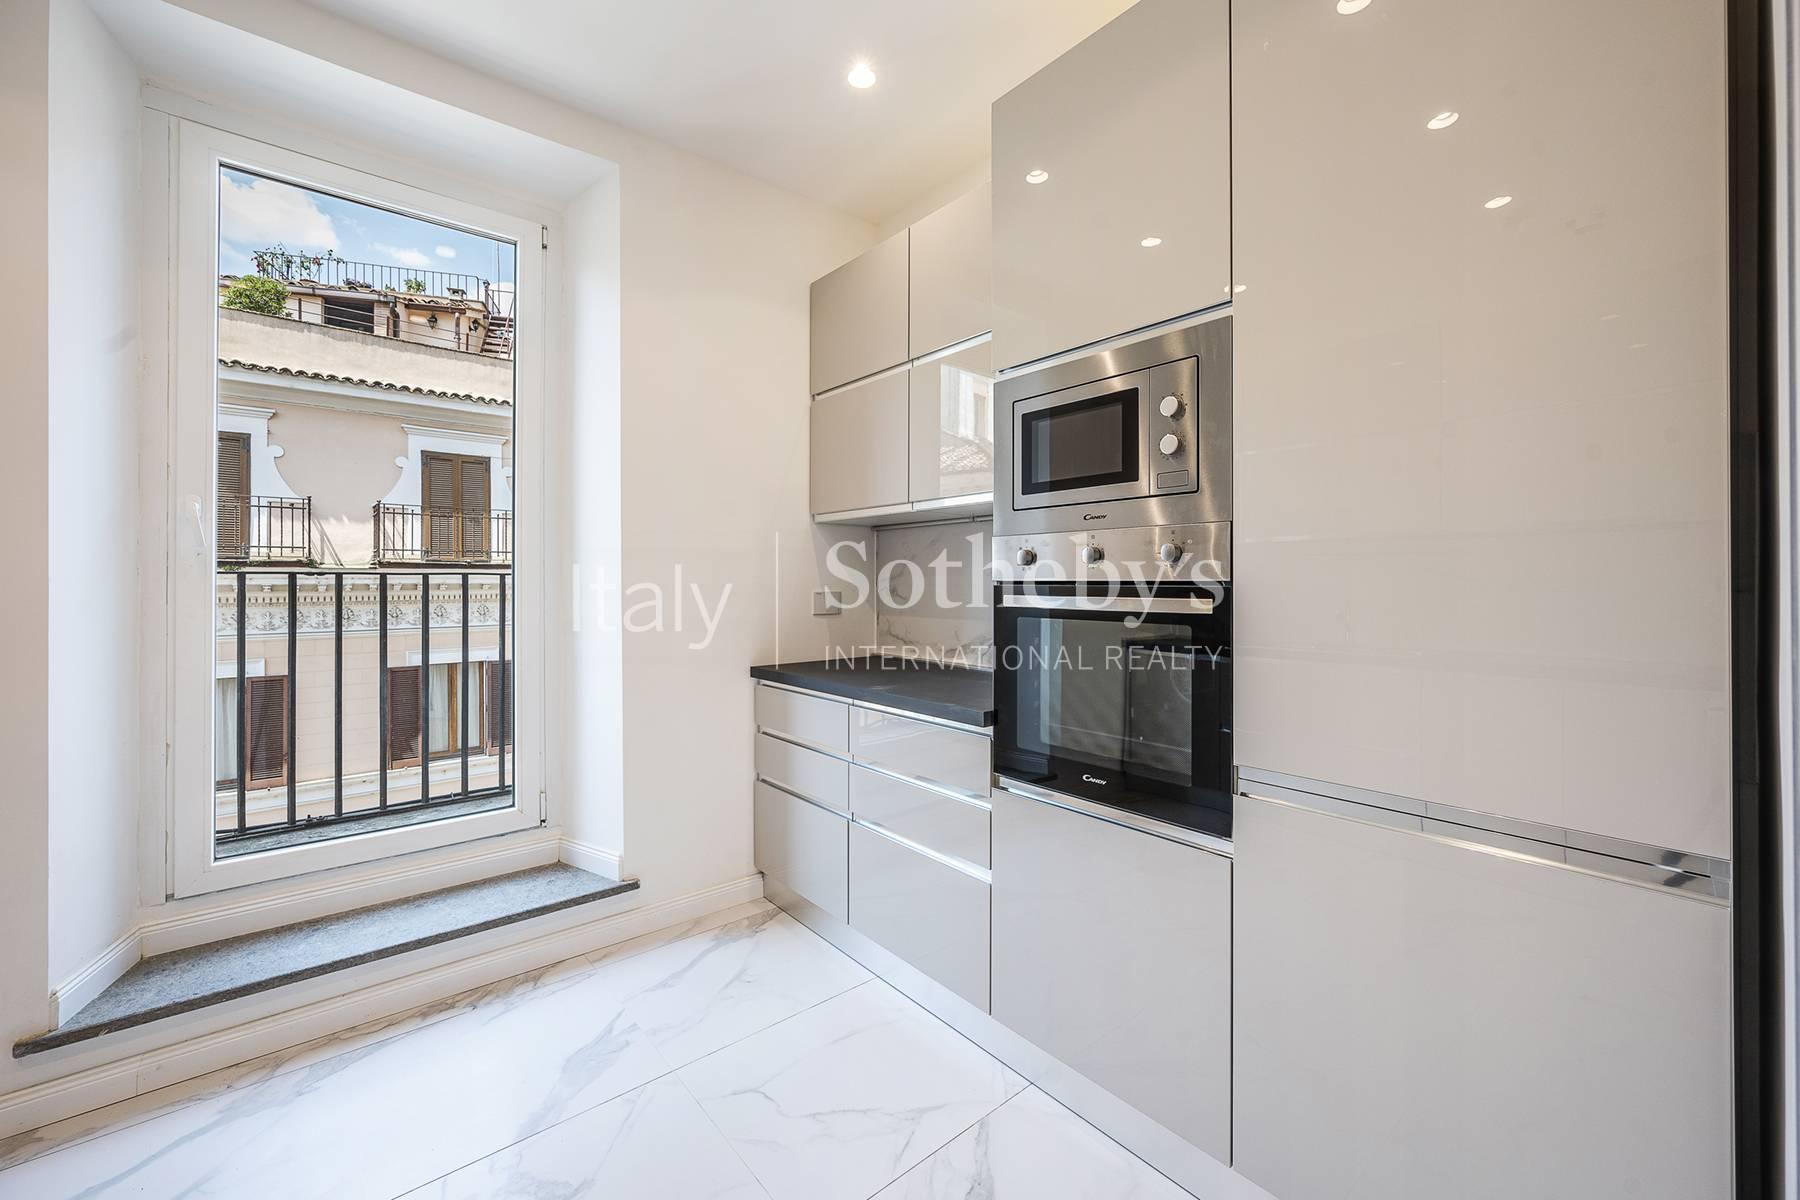 Charming apartment a stone's throw from Piazza del Popolo - 6